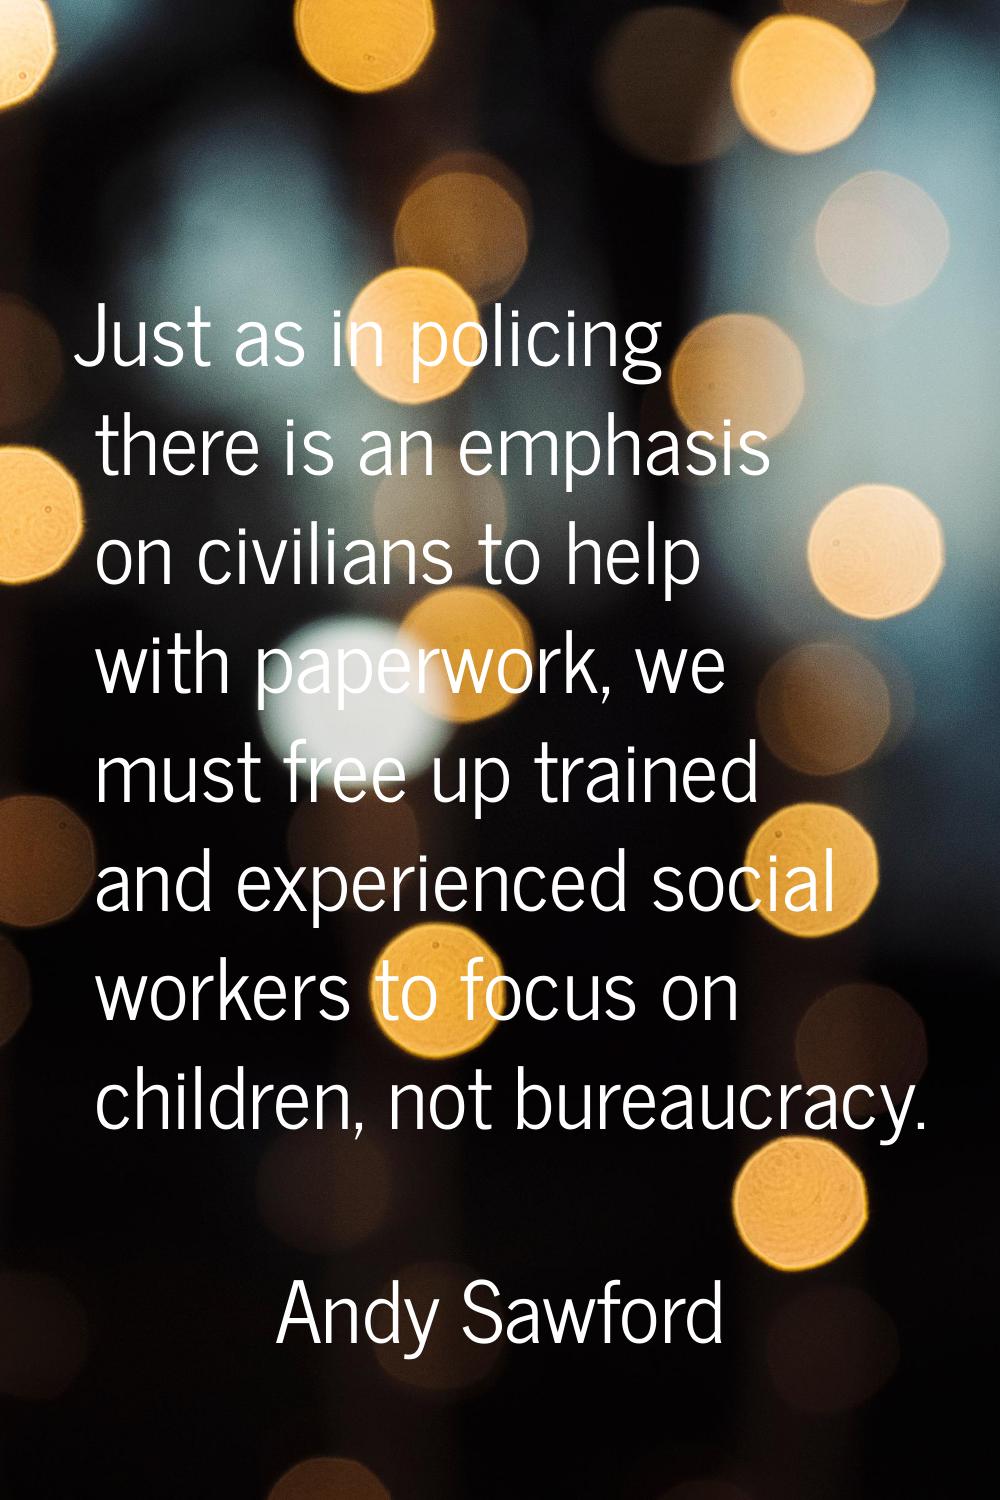 Just as in policing there is an emphasis on civilians to help with paperwork, we must free up train